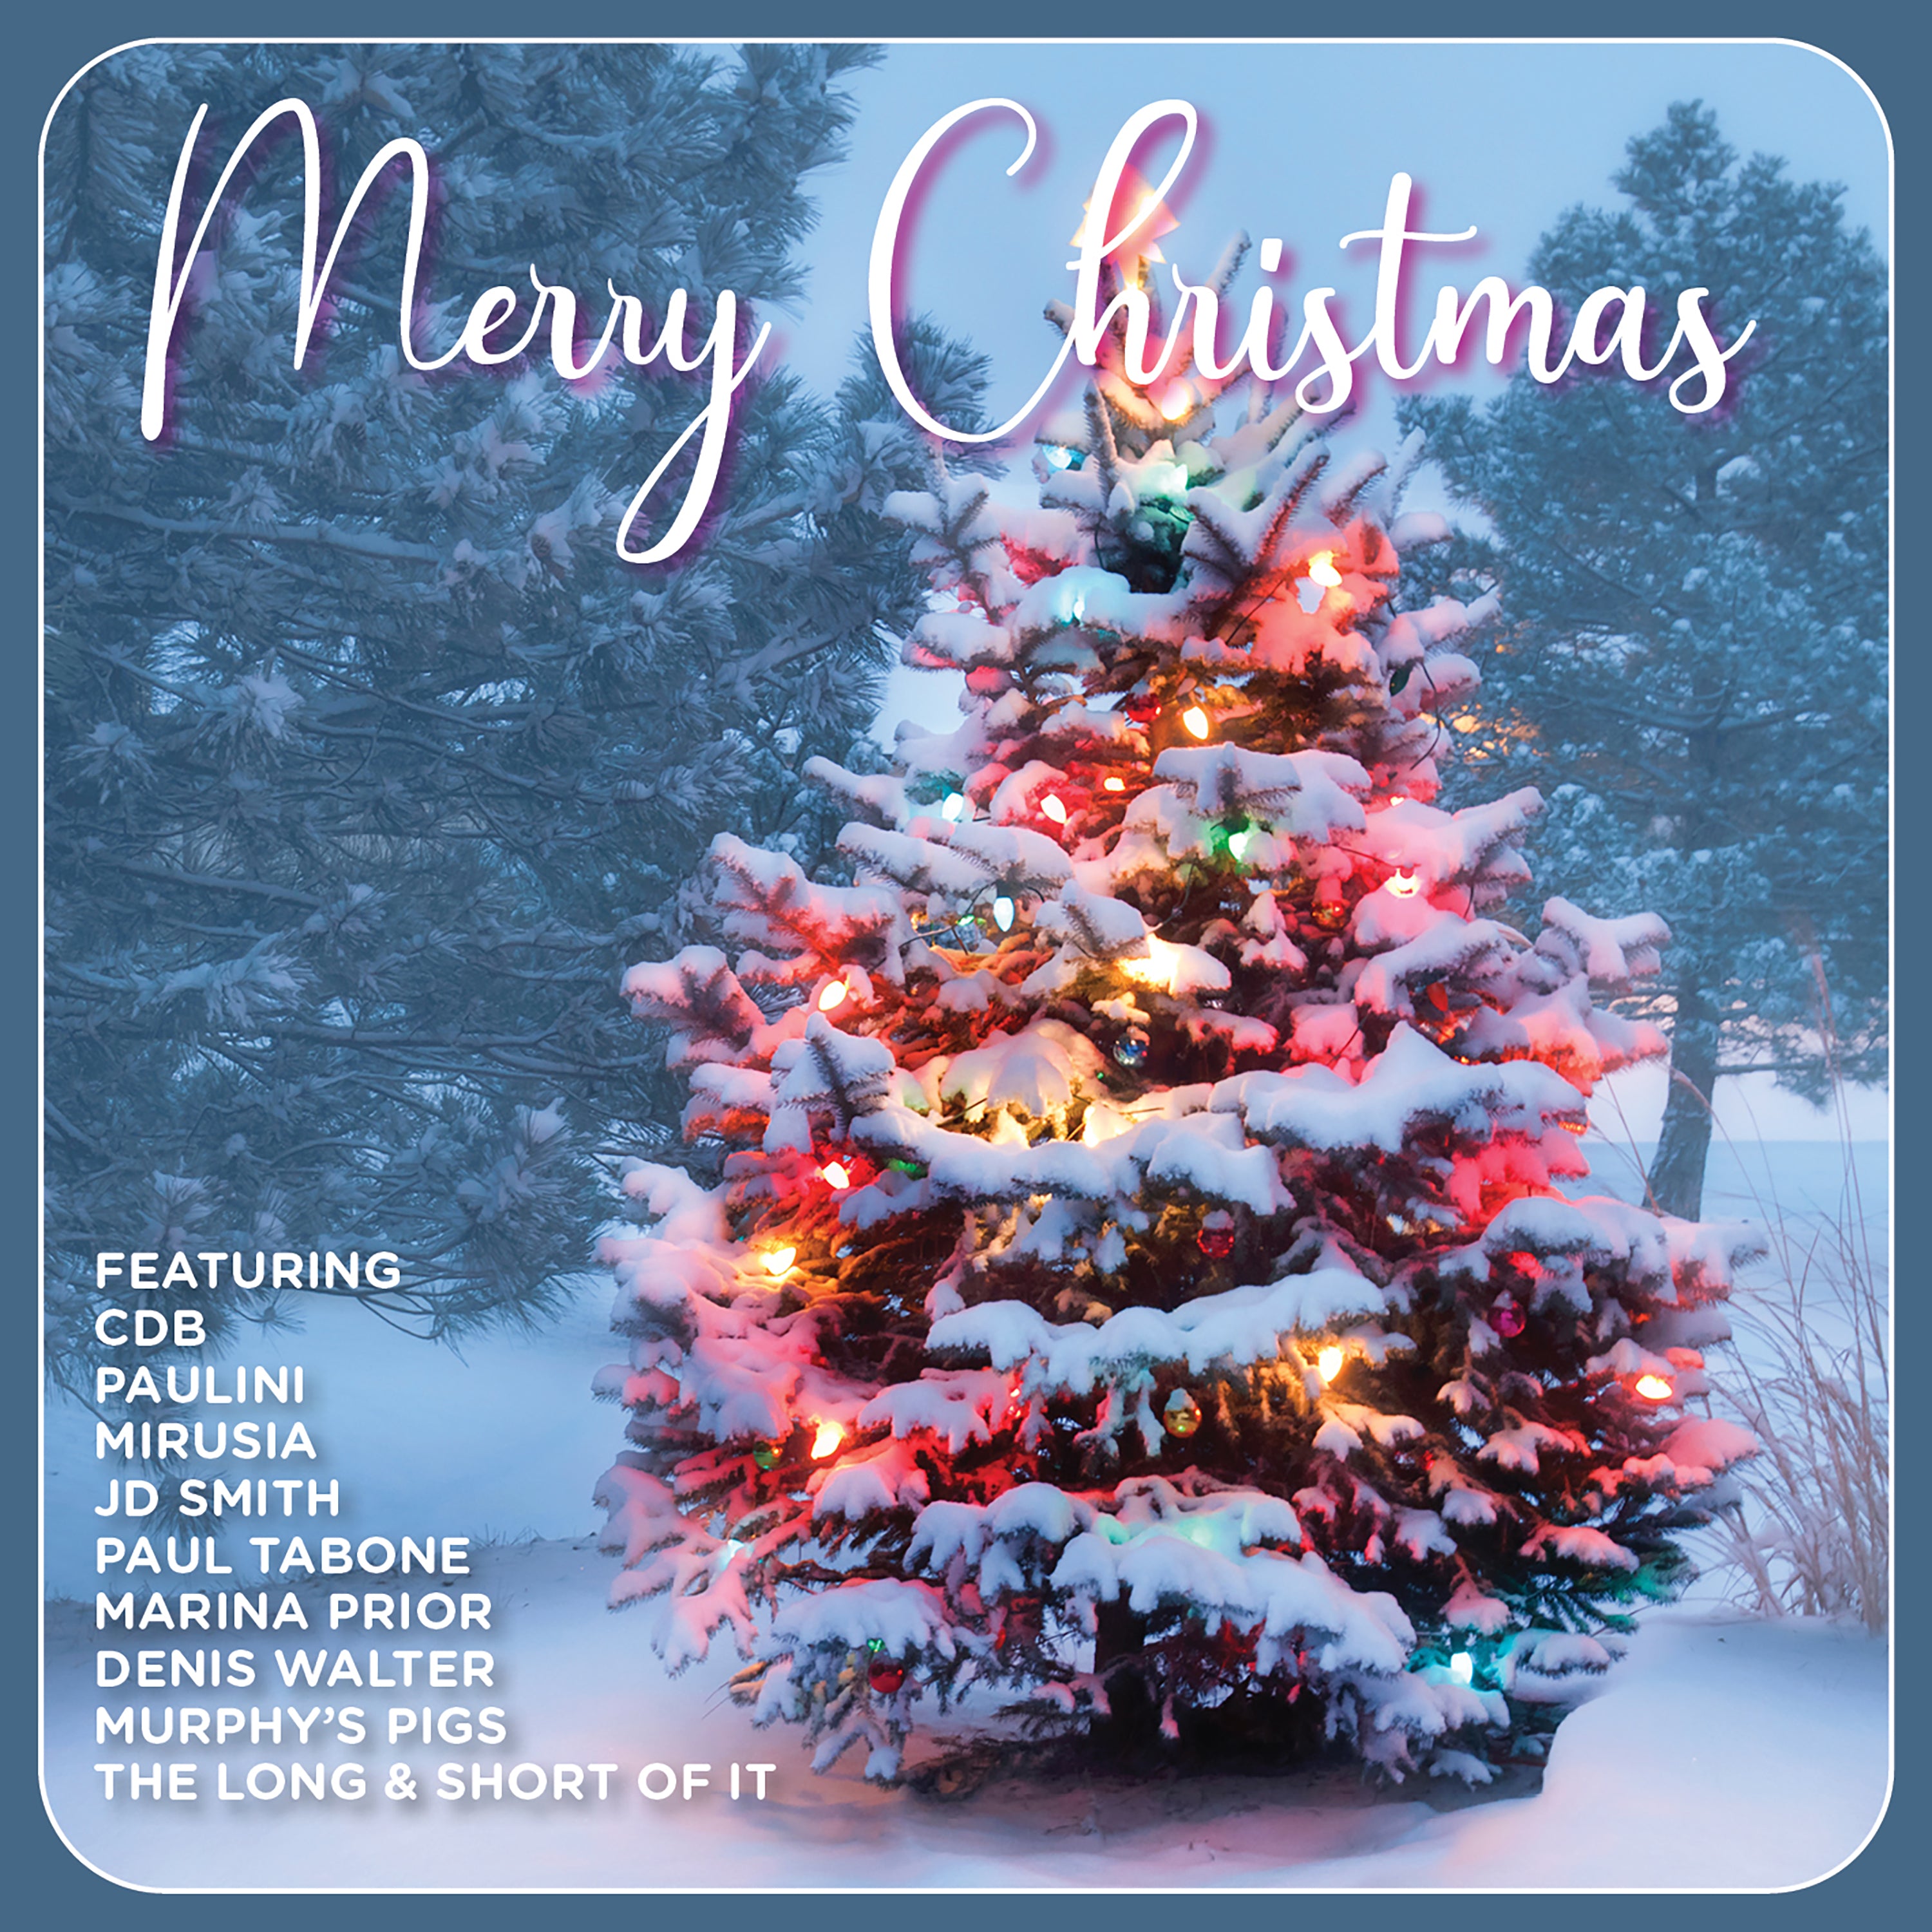 VARIOUS ARTISTS - MERRY CHRISTMAS